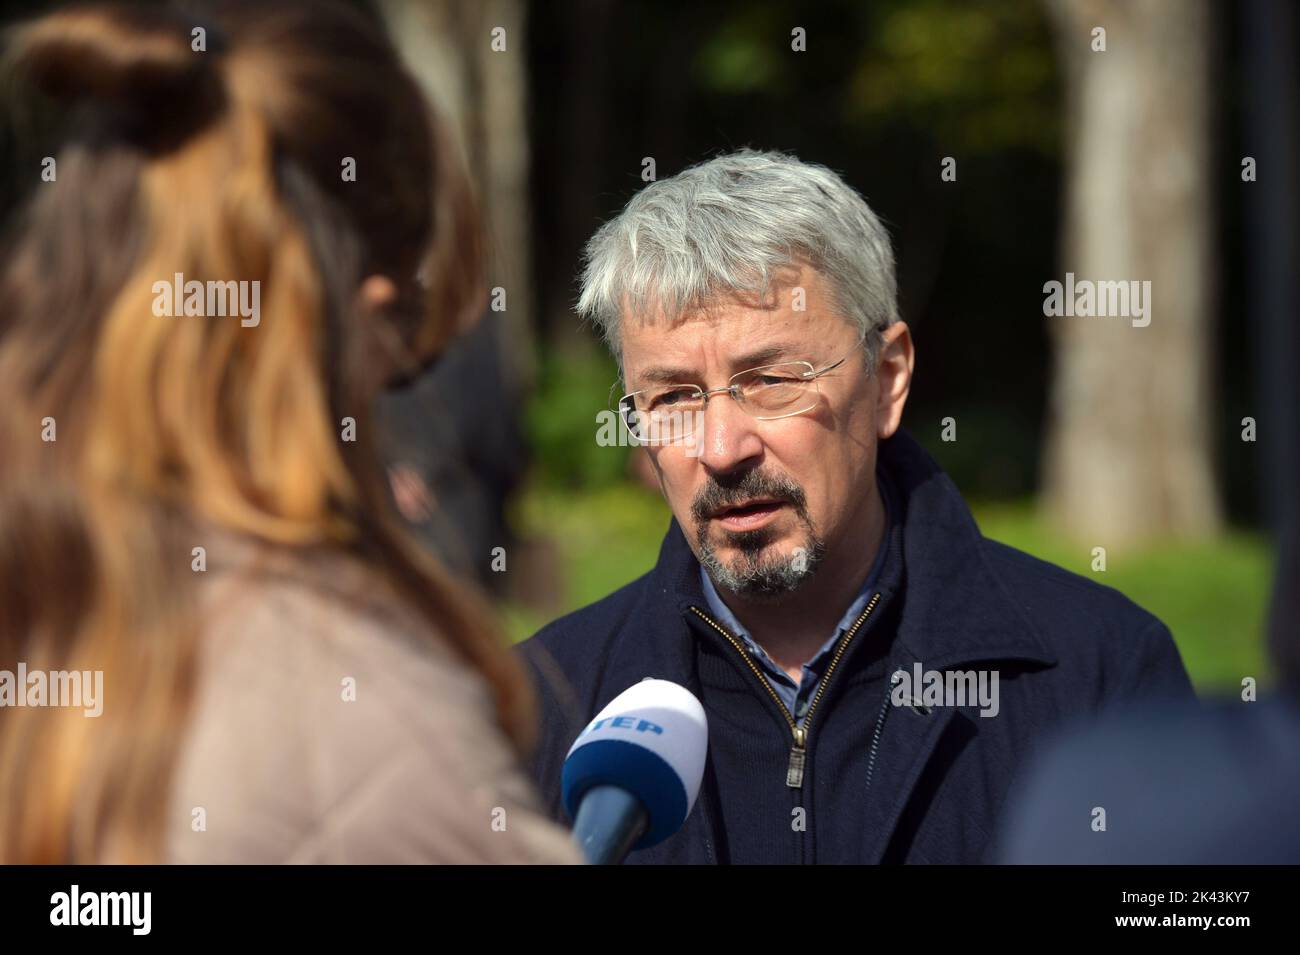 KYIV, UKRAINE - SEPTEMBER 29, 2022 - Minister of Culture and Information Policy of Ukraine Oleksandr Tkachenko speaks with journalists after a joint interreligious prayer dedicated to the Day of Remembrance of the Babyn Yar Victims at the symbolic Place for Reflection synagogue on the territory of the Babyn Yar National Historical and Memorial Reserve, Kyiv, capital of Ukraine. Stock Photo